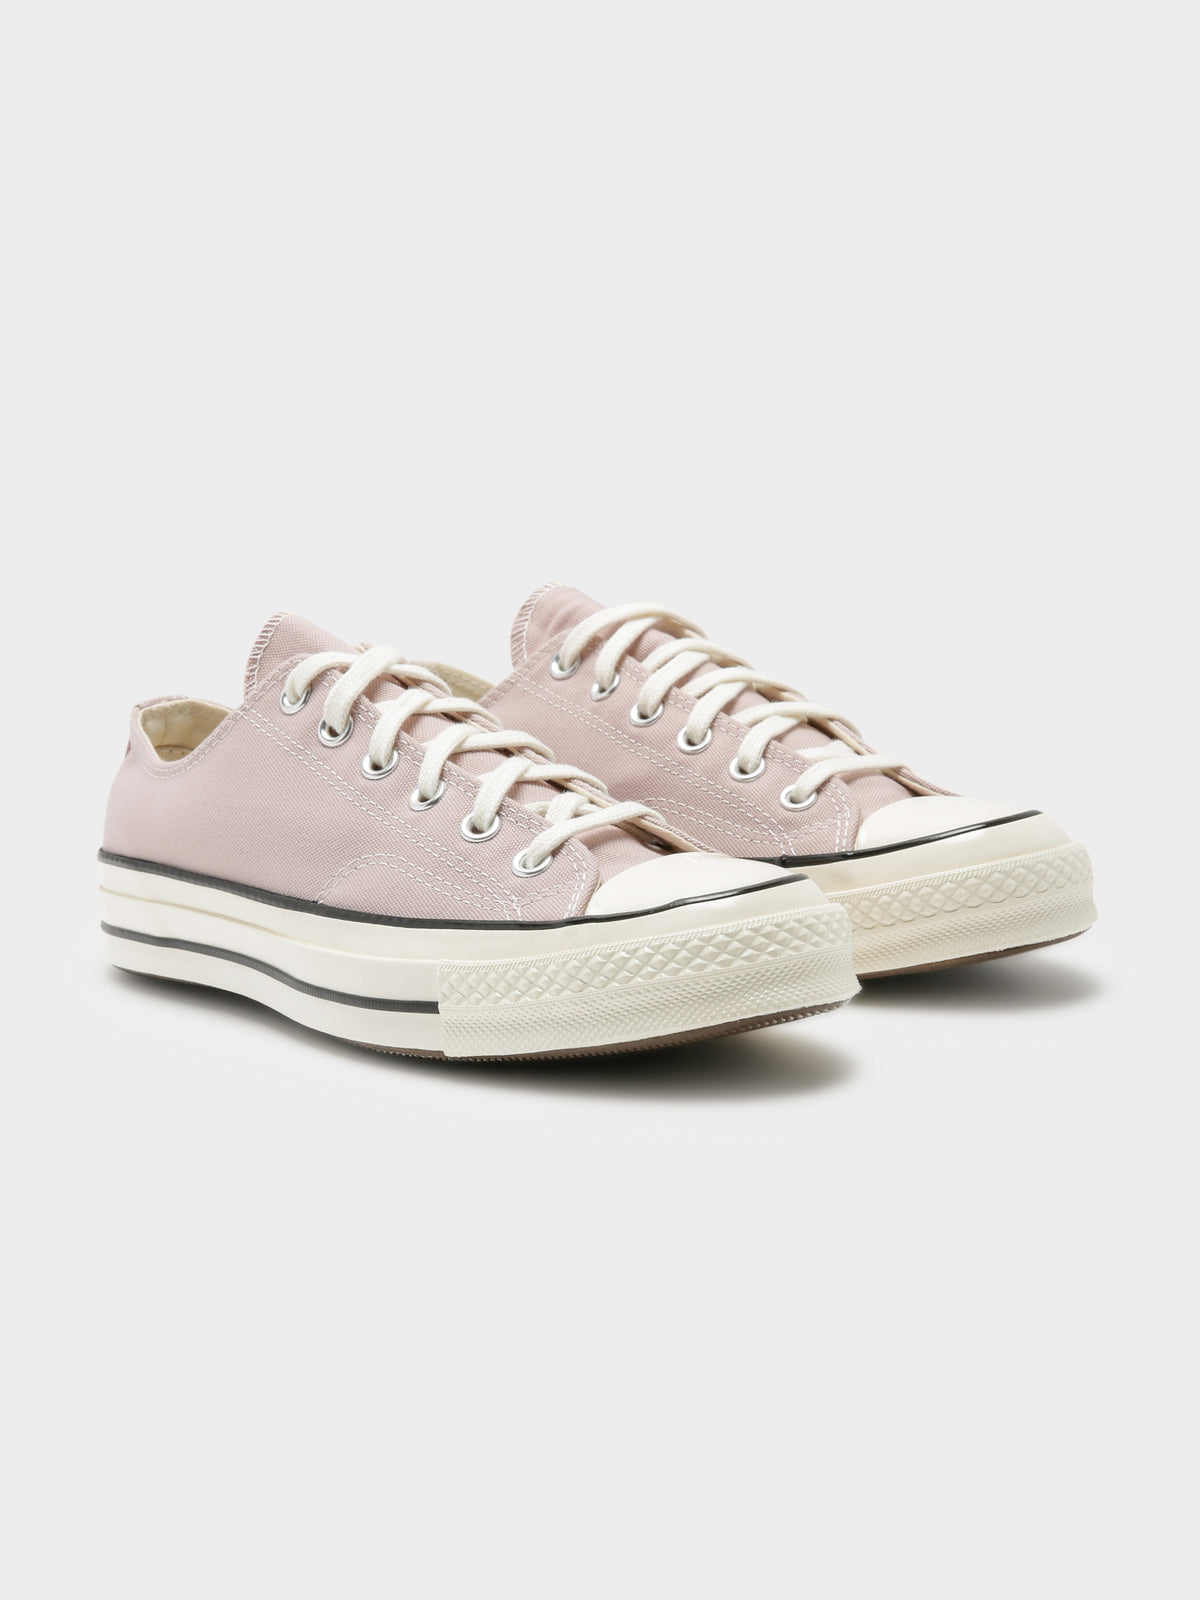 Unisex Chuck 70 Ox Sneakers in Mauve